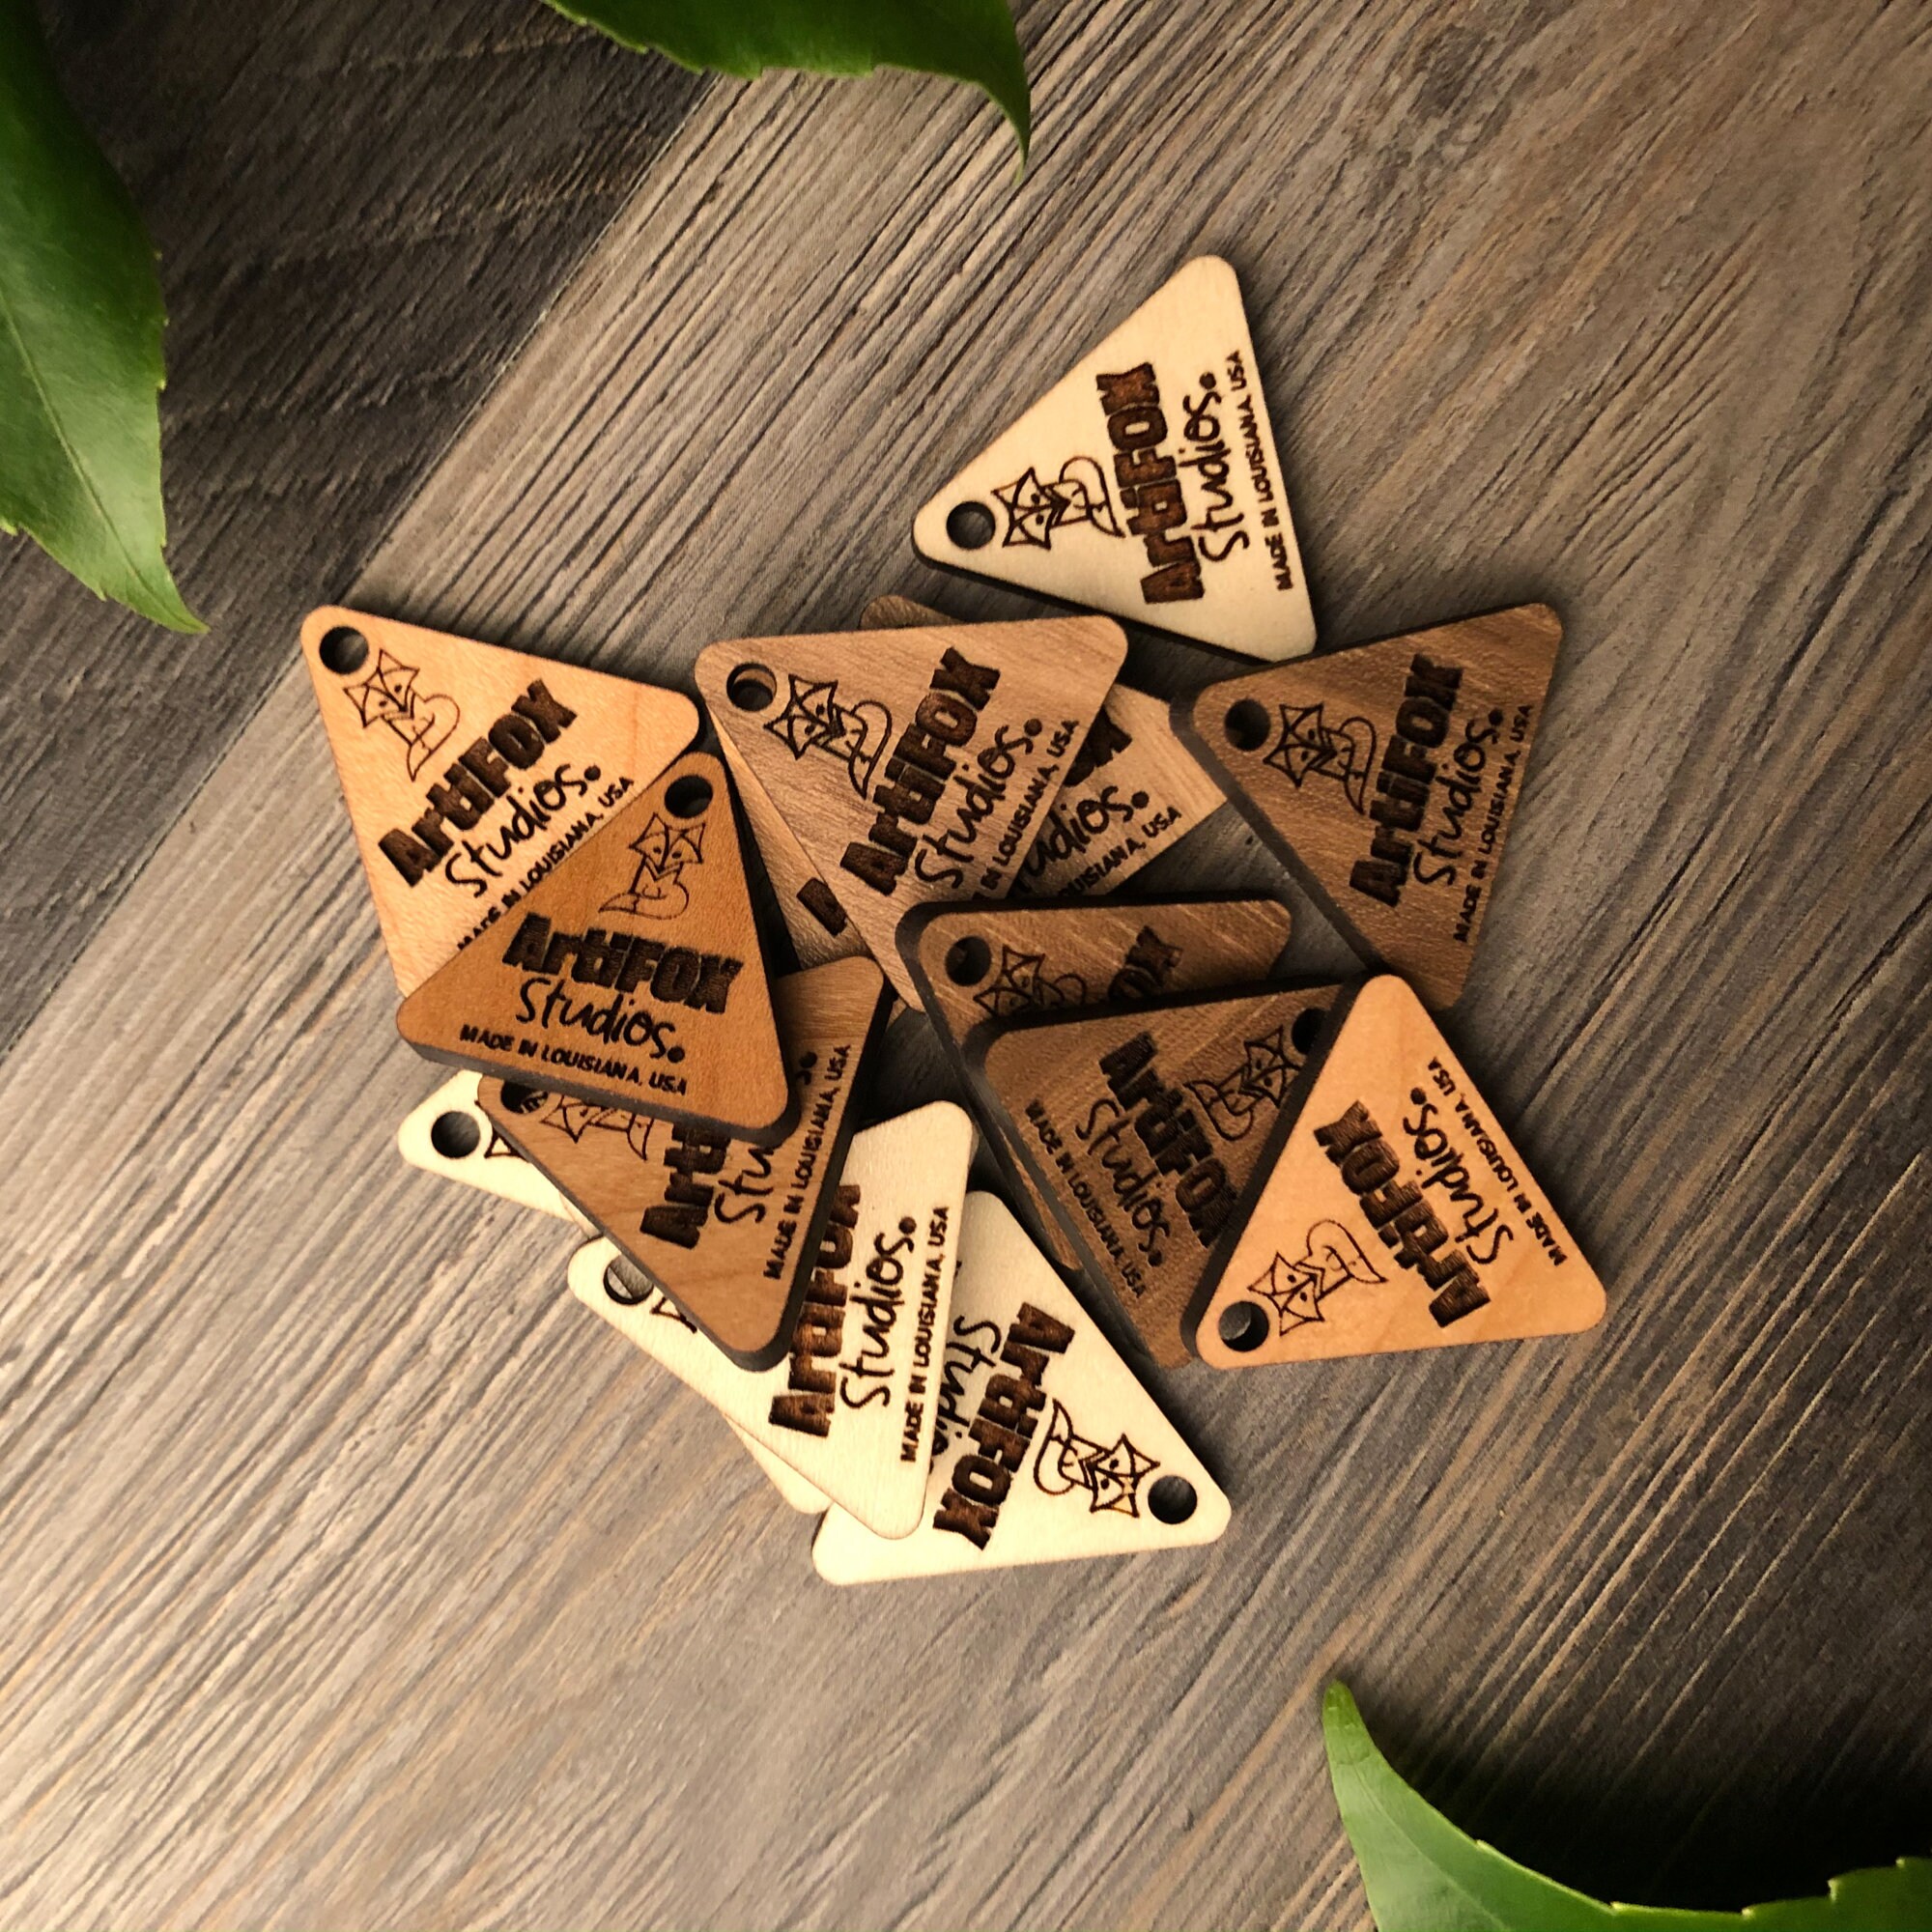 Customized Triangular Wooden Product Tags for Handmade Items, Personalized  Wood Buttons for Knitted and Crochet Items, Triangle Shaped Tags 